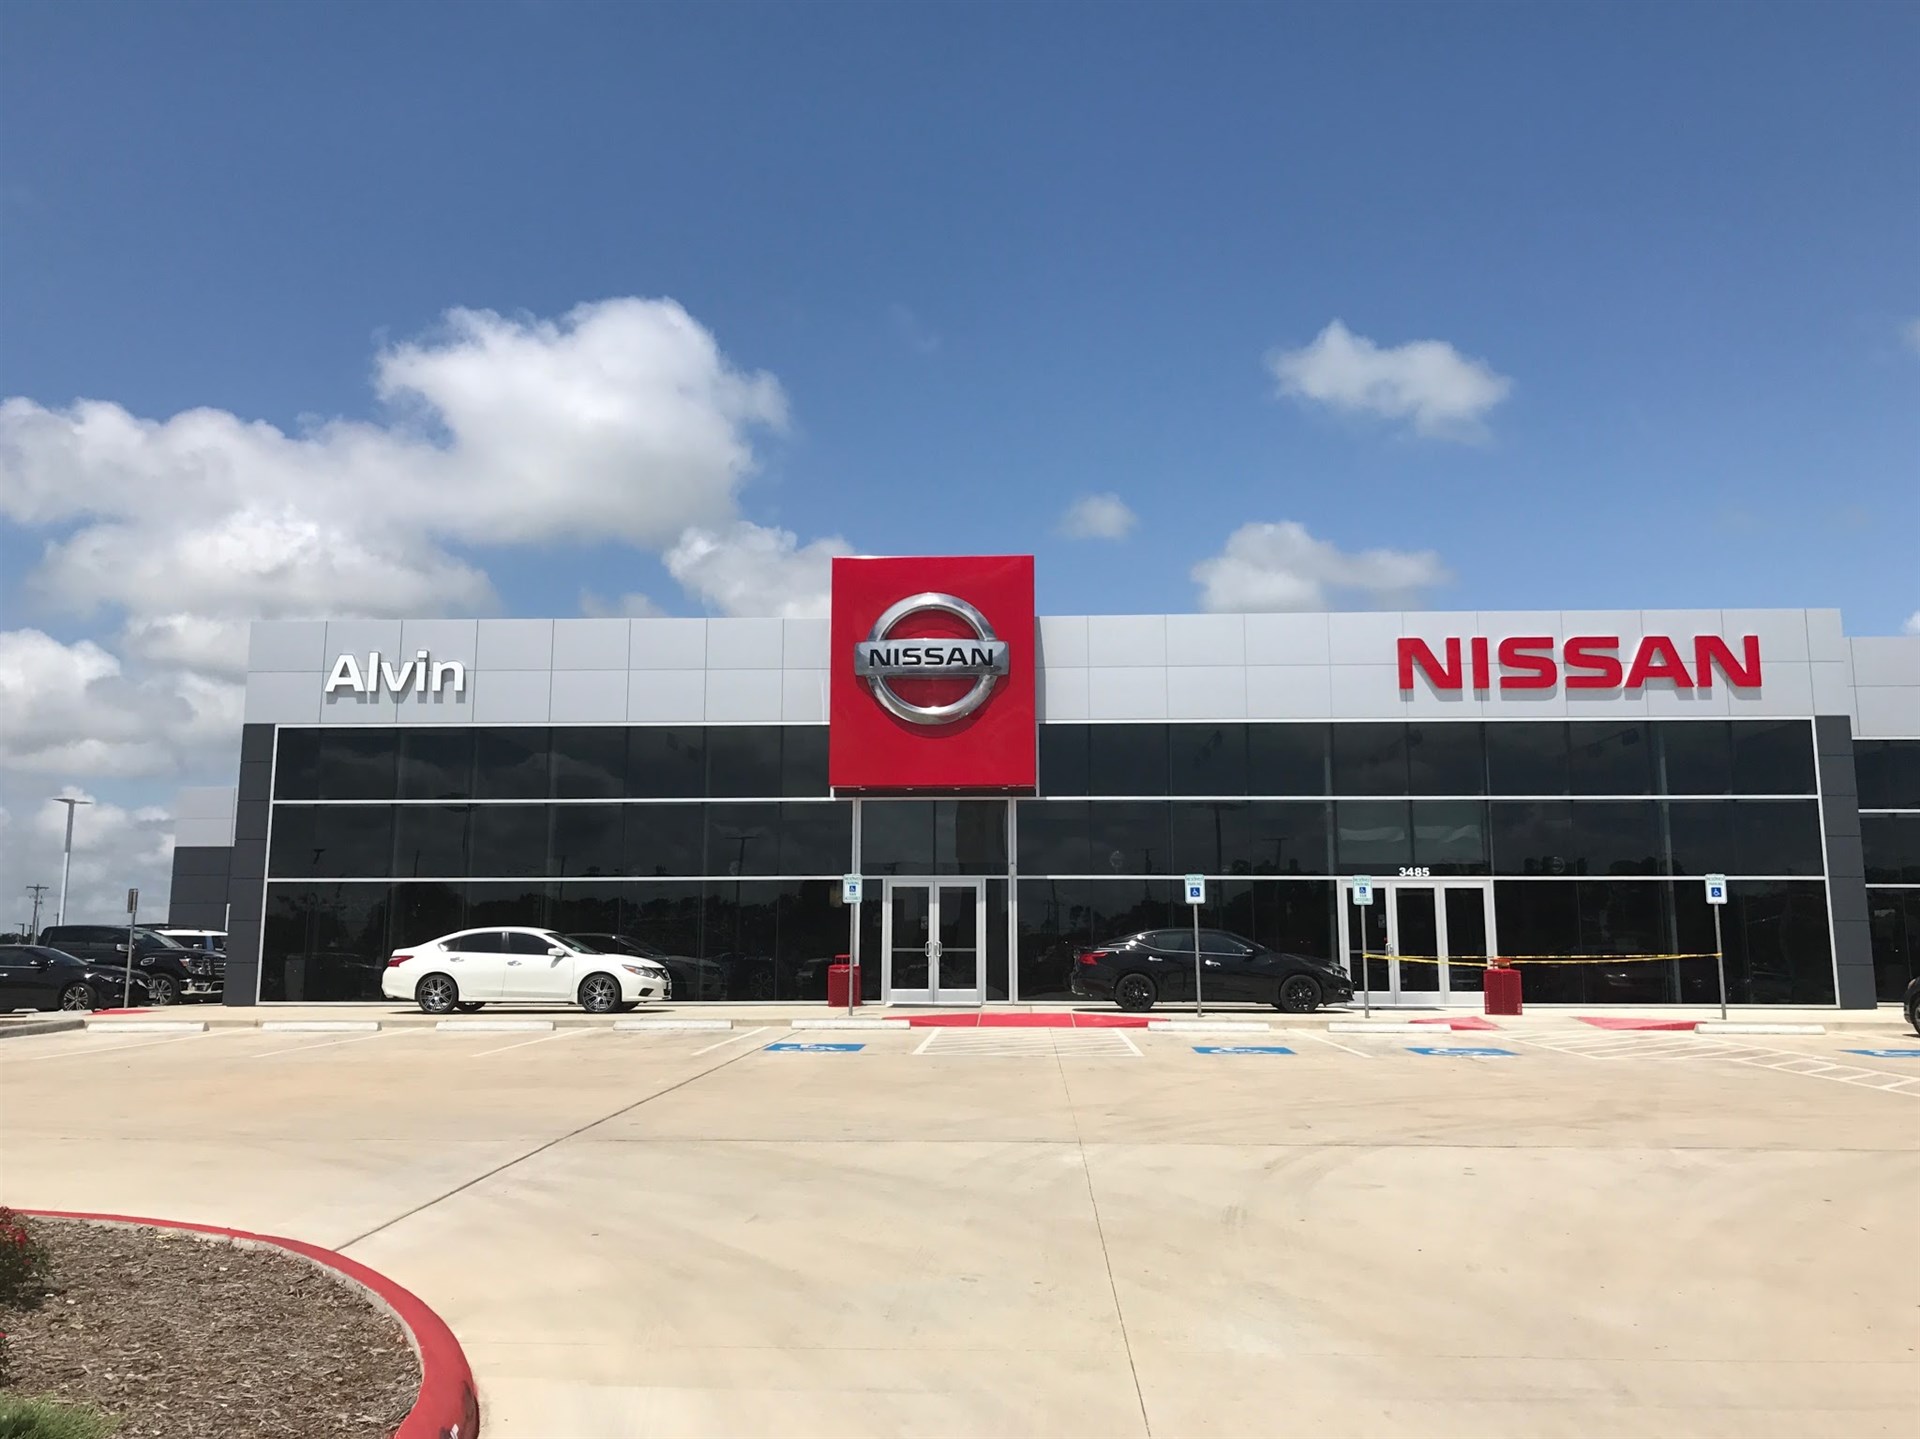 Reliance Nissan Of Alvin